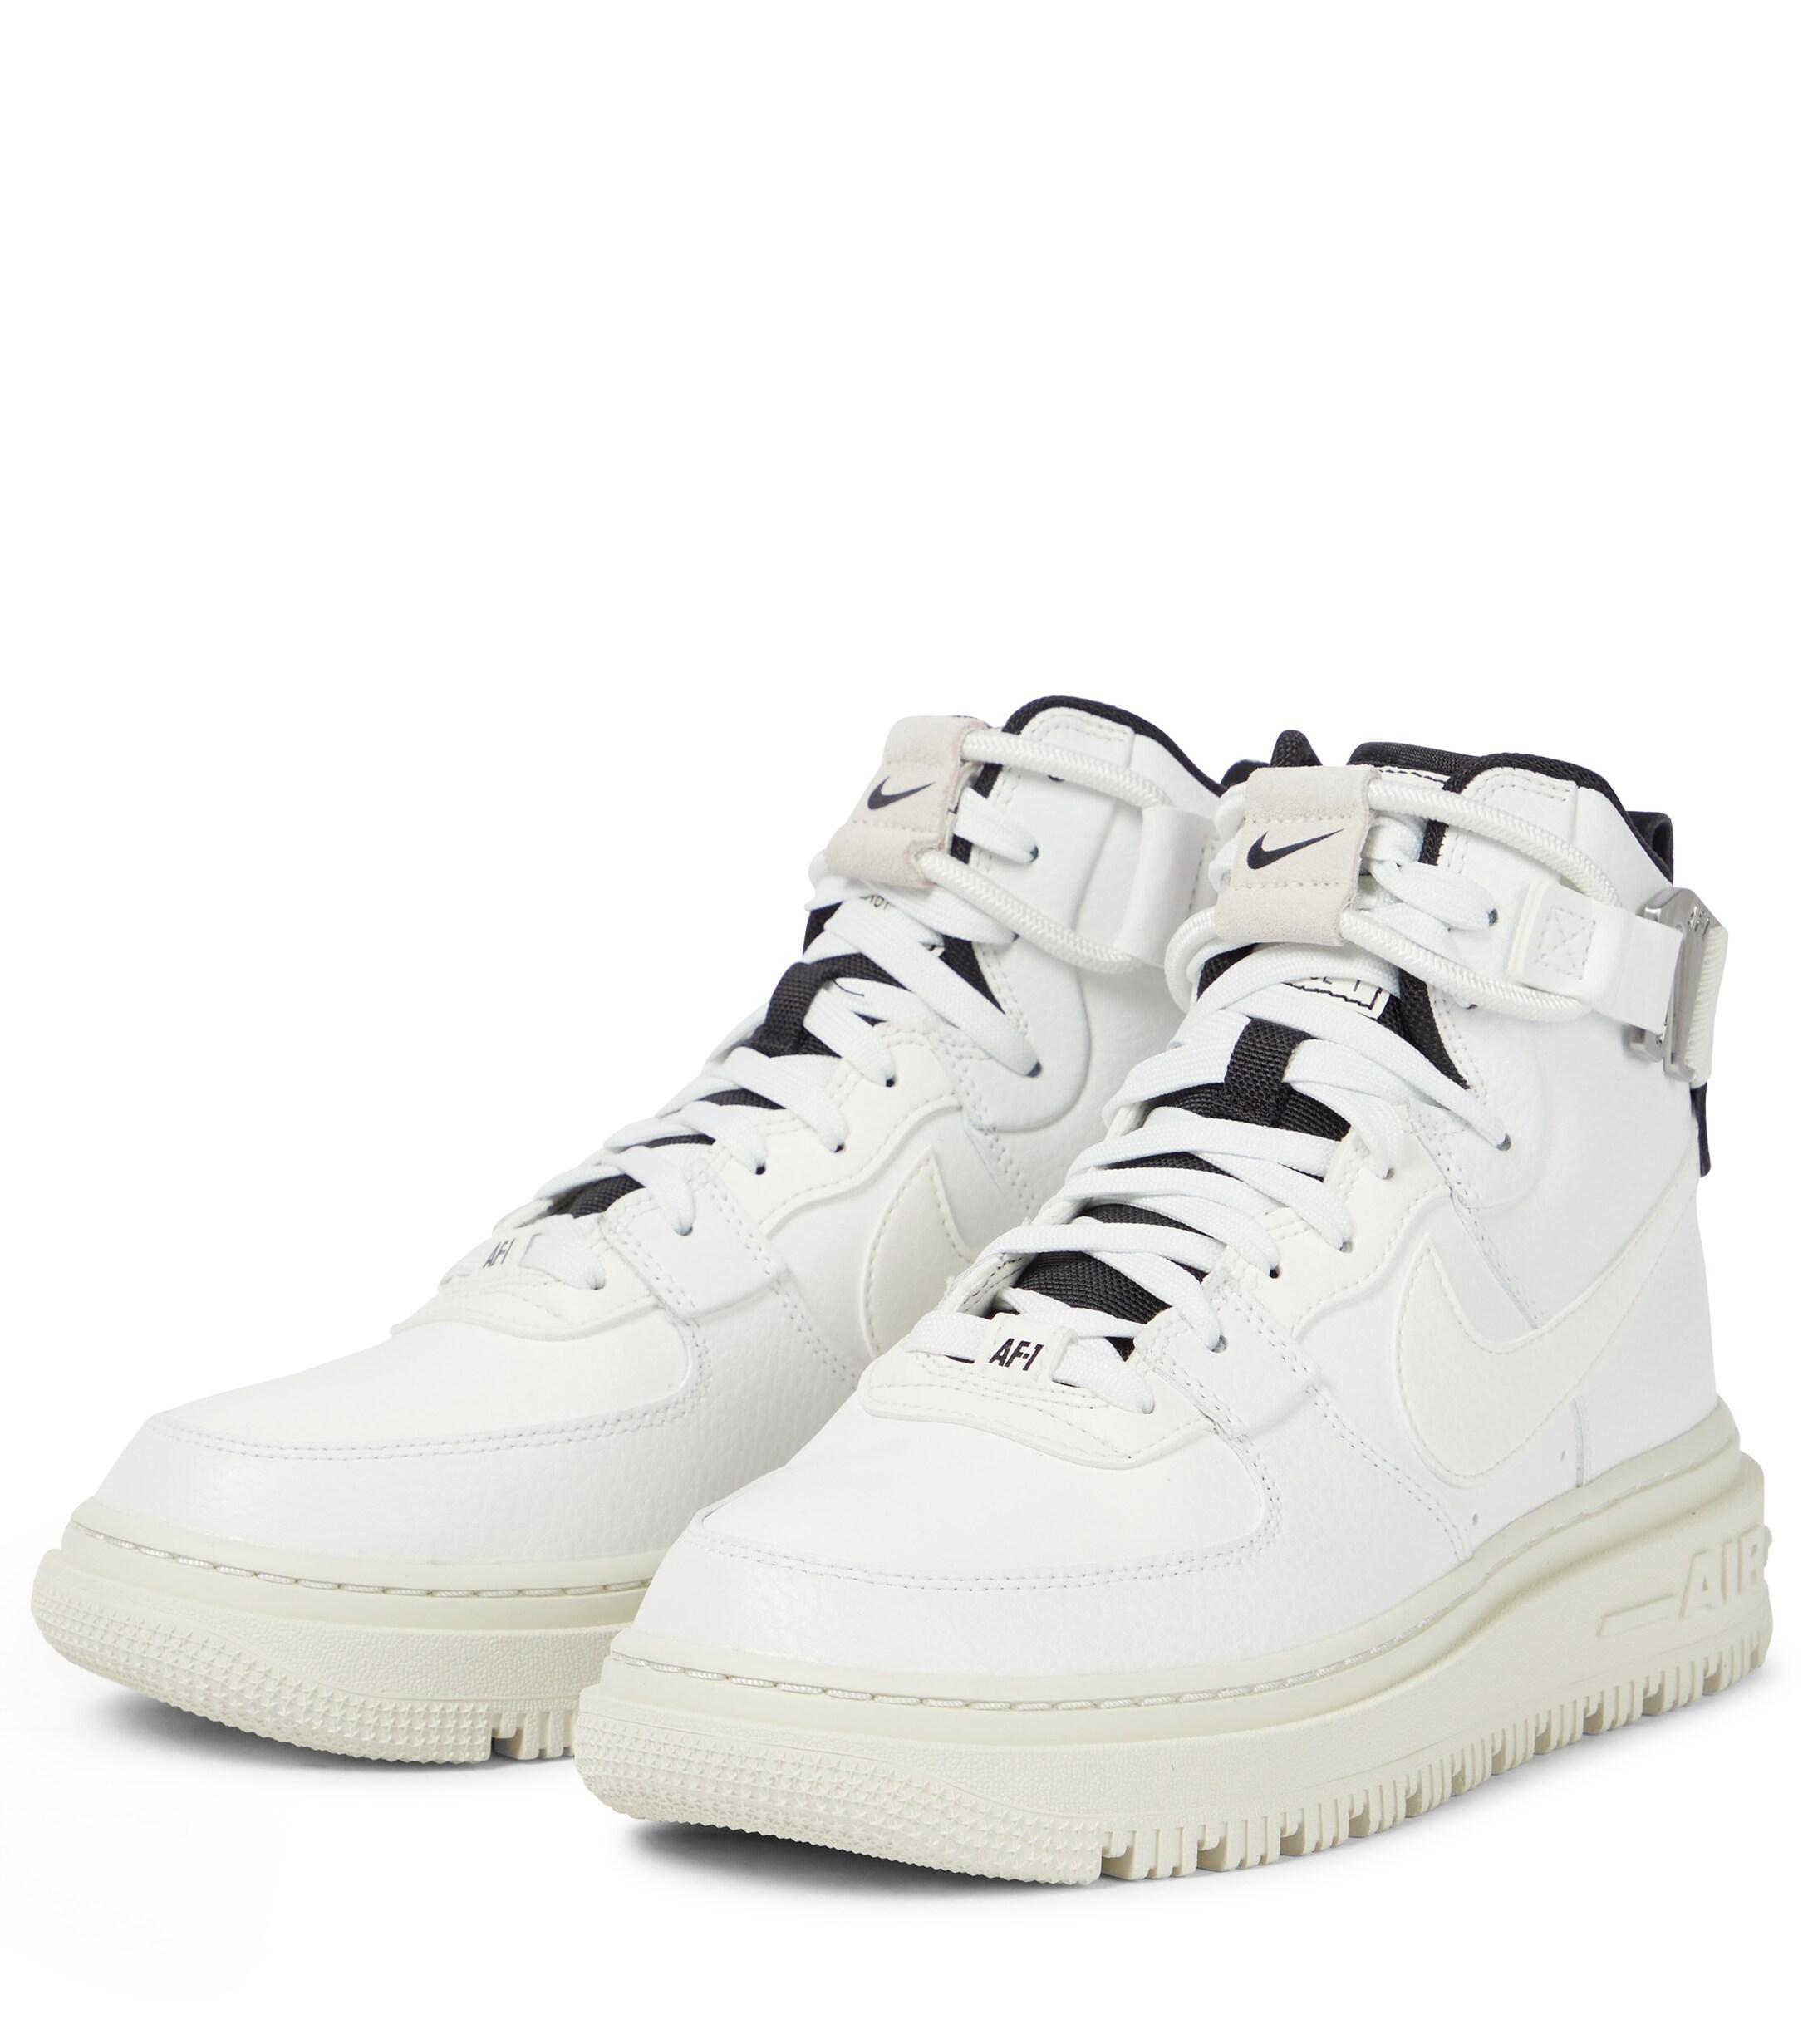 Nike Leather Air Force 1 High Utility 2.0 Sneakers in White - Lyst